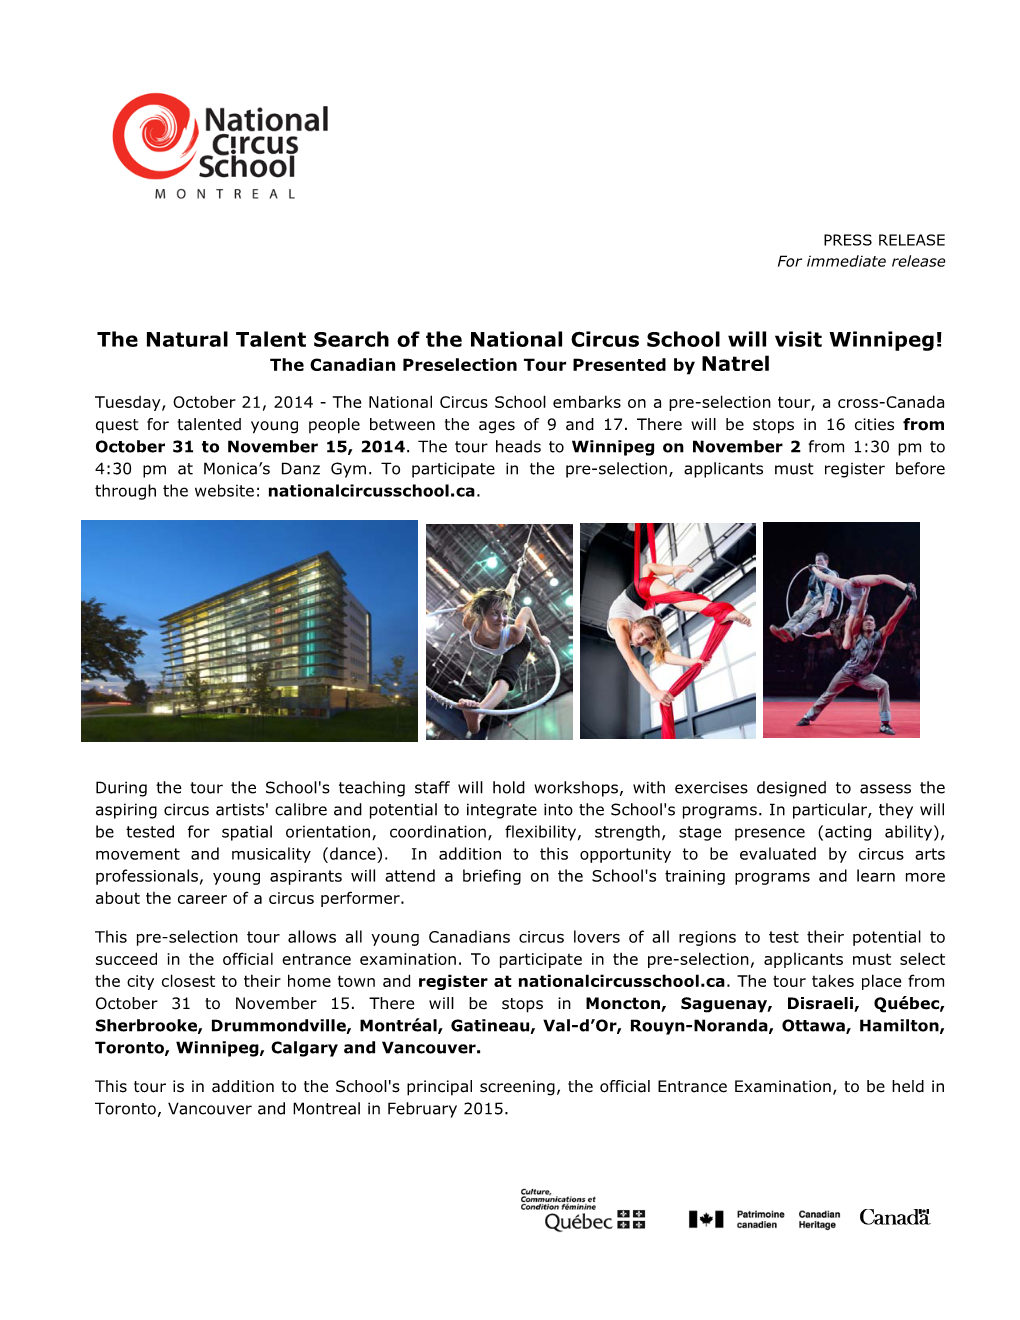 The Natural Talent Search of the National Circus School Will Visit Winnipeg! the Canadian Preselection Tour Presented by Natrel